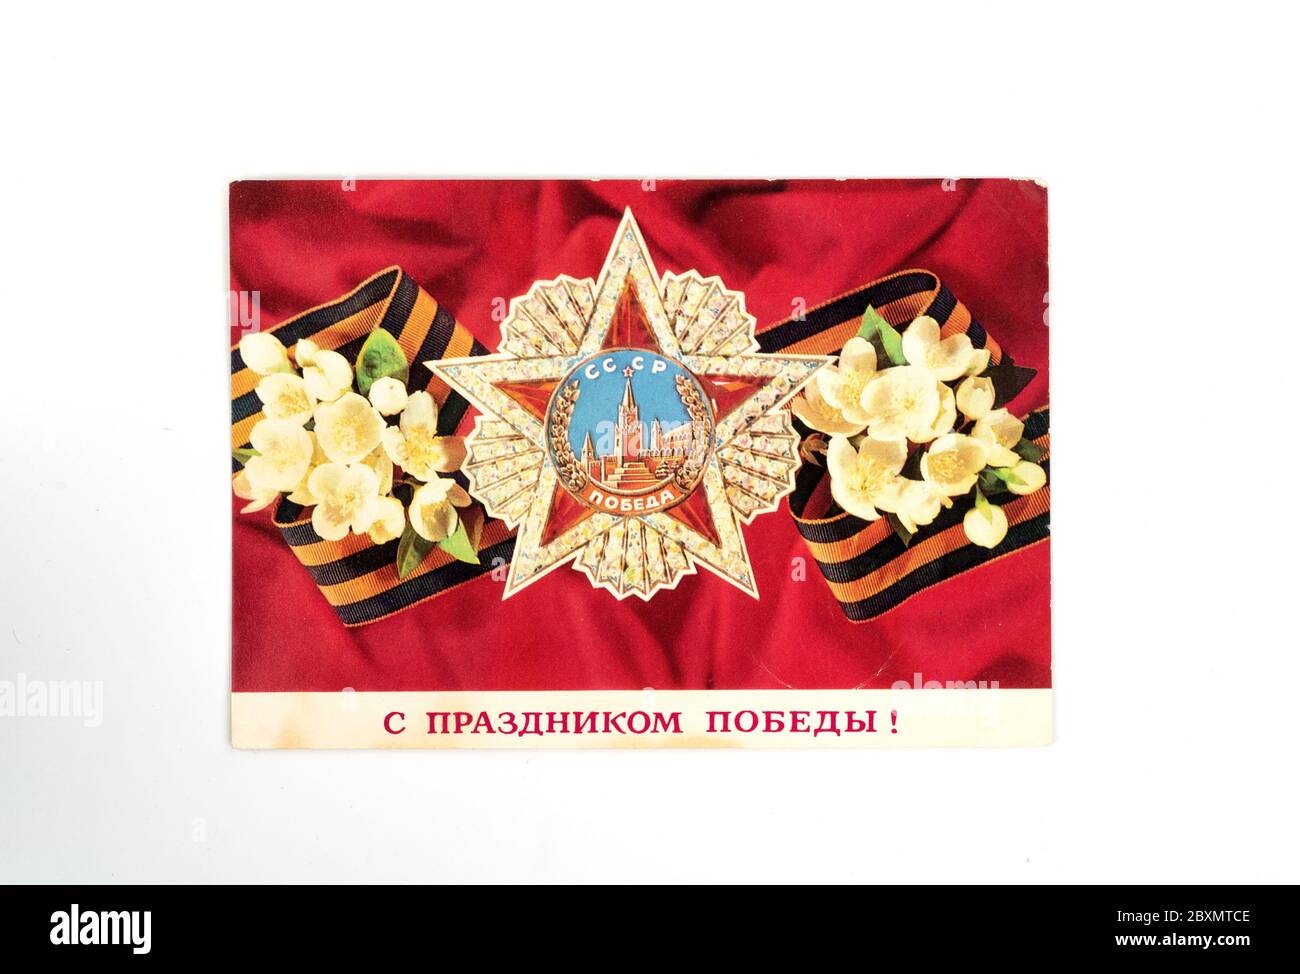 Moscow, Russia, June 07, 2020. Postcard of Soviet times with the image of St. George ribbon with spring flowers and a military order of victory. Artis Stock Photo